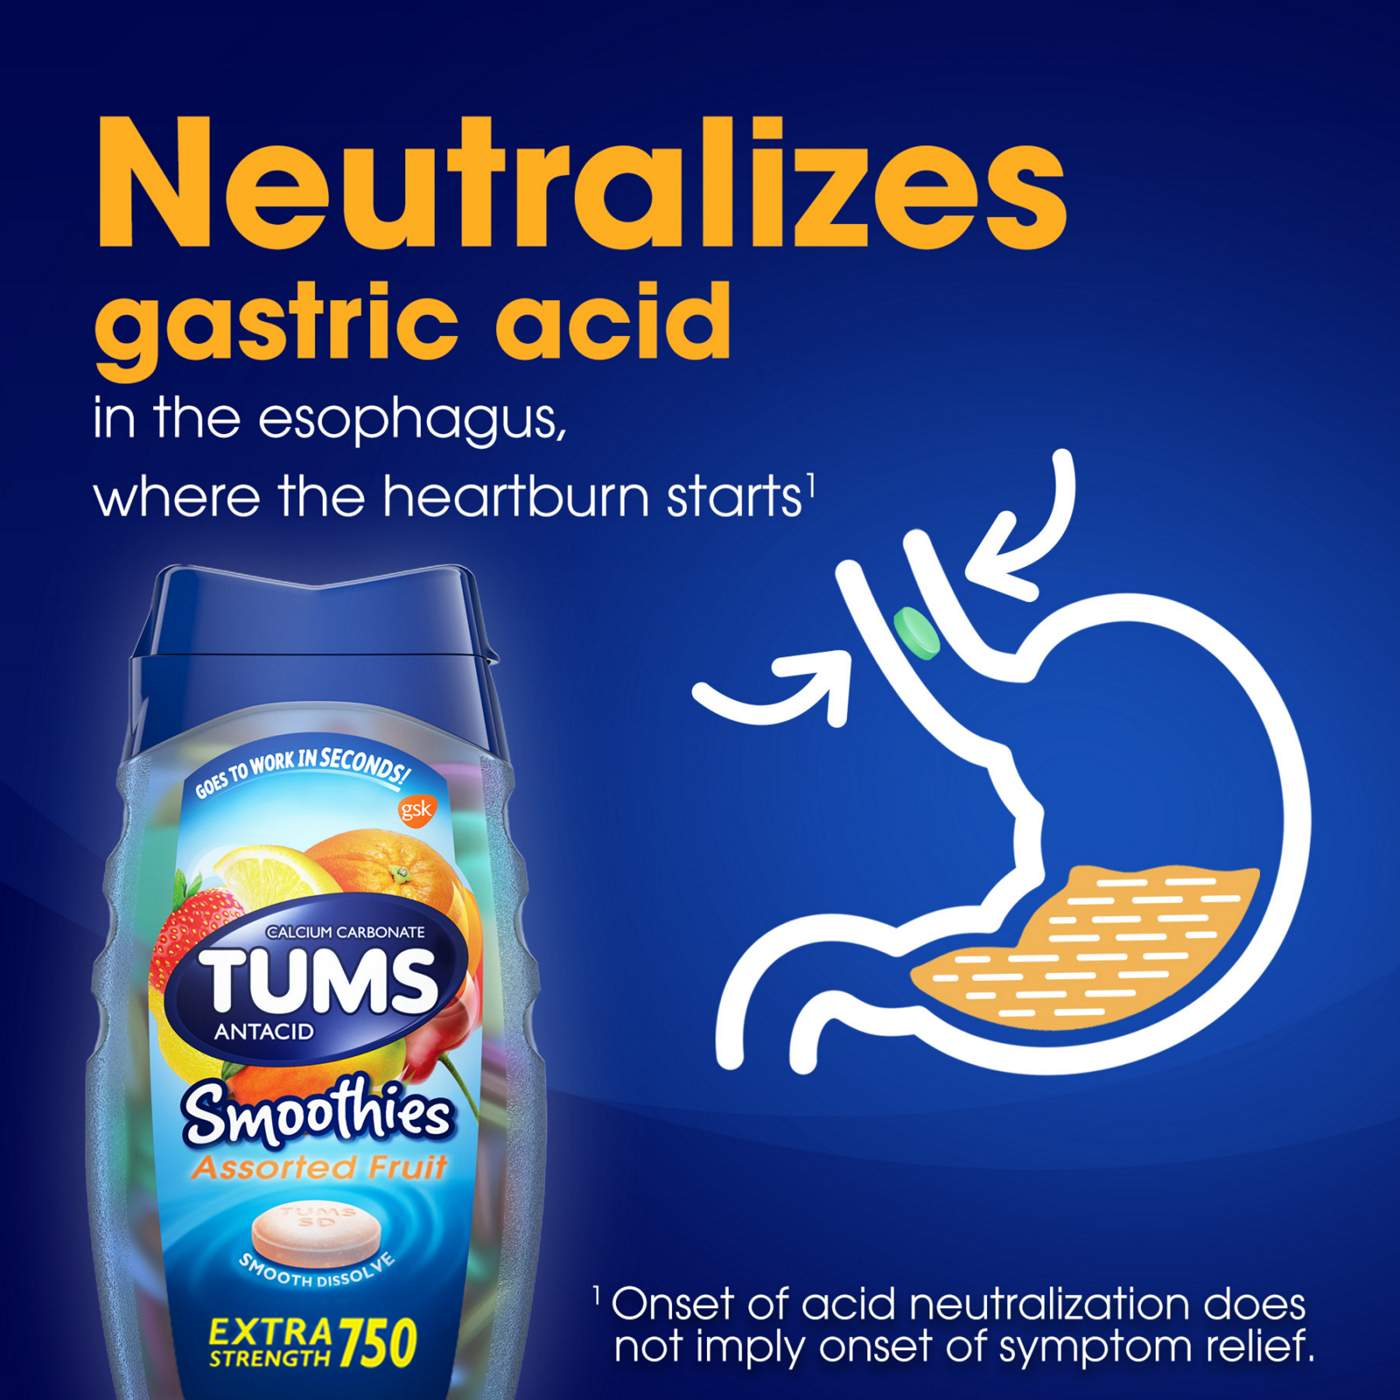 Tums Antacid Smoothies Chewable Tablets - Assorted Fruit; image 2 of 8